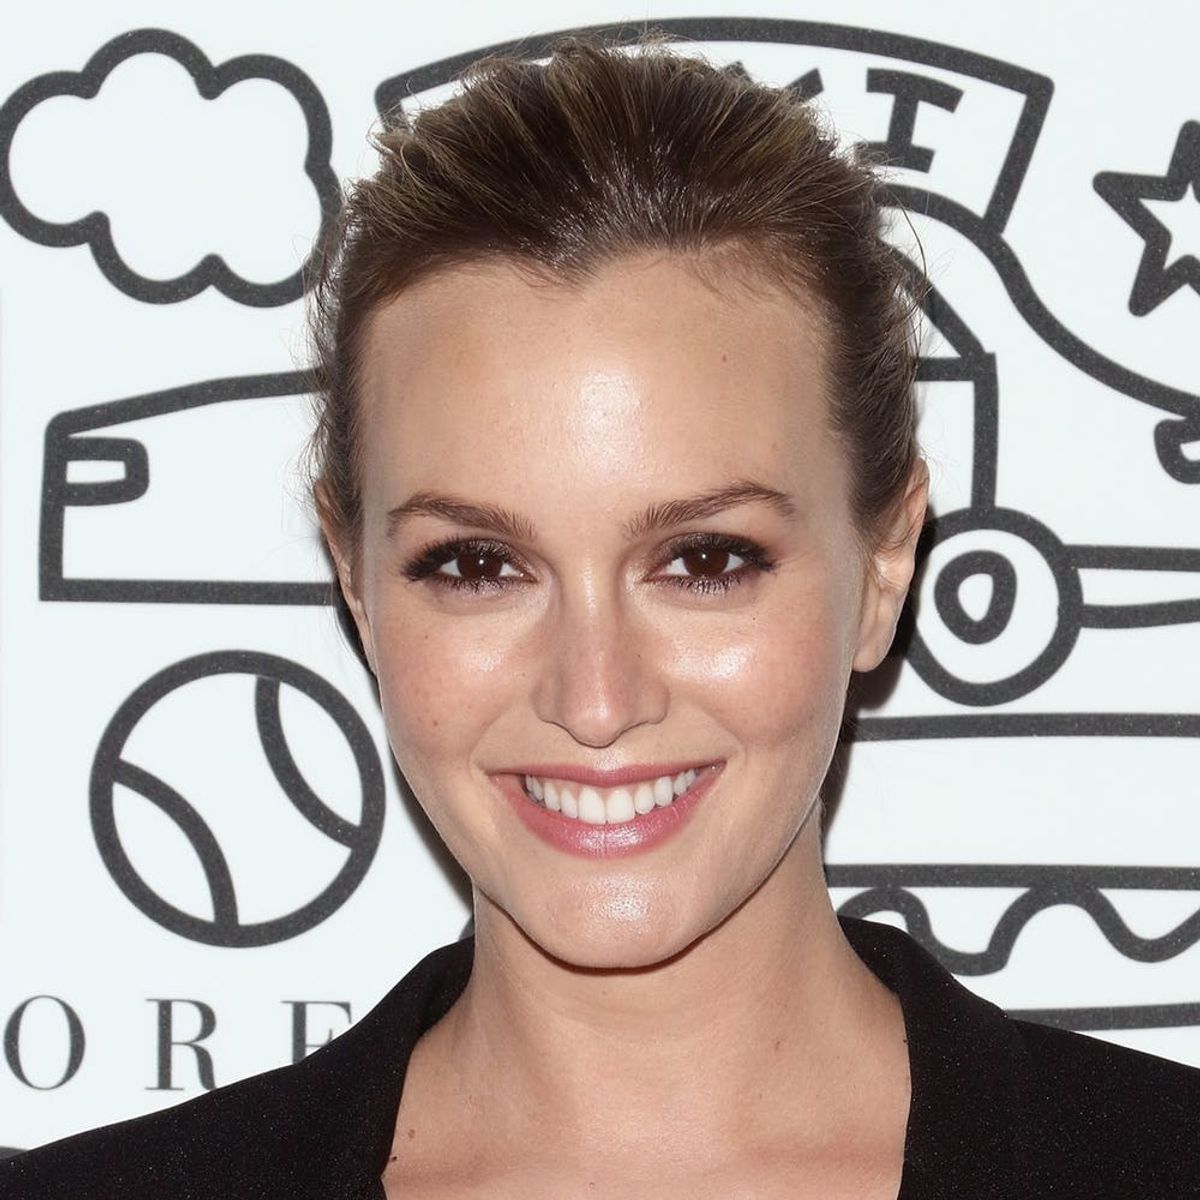 Leighton Meester’s Daily Makeup Routine Might Shock You